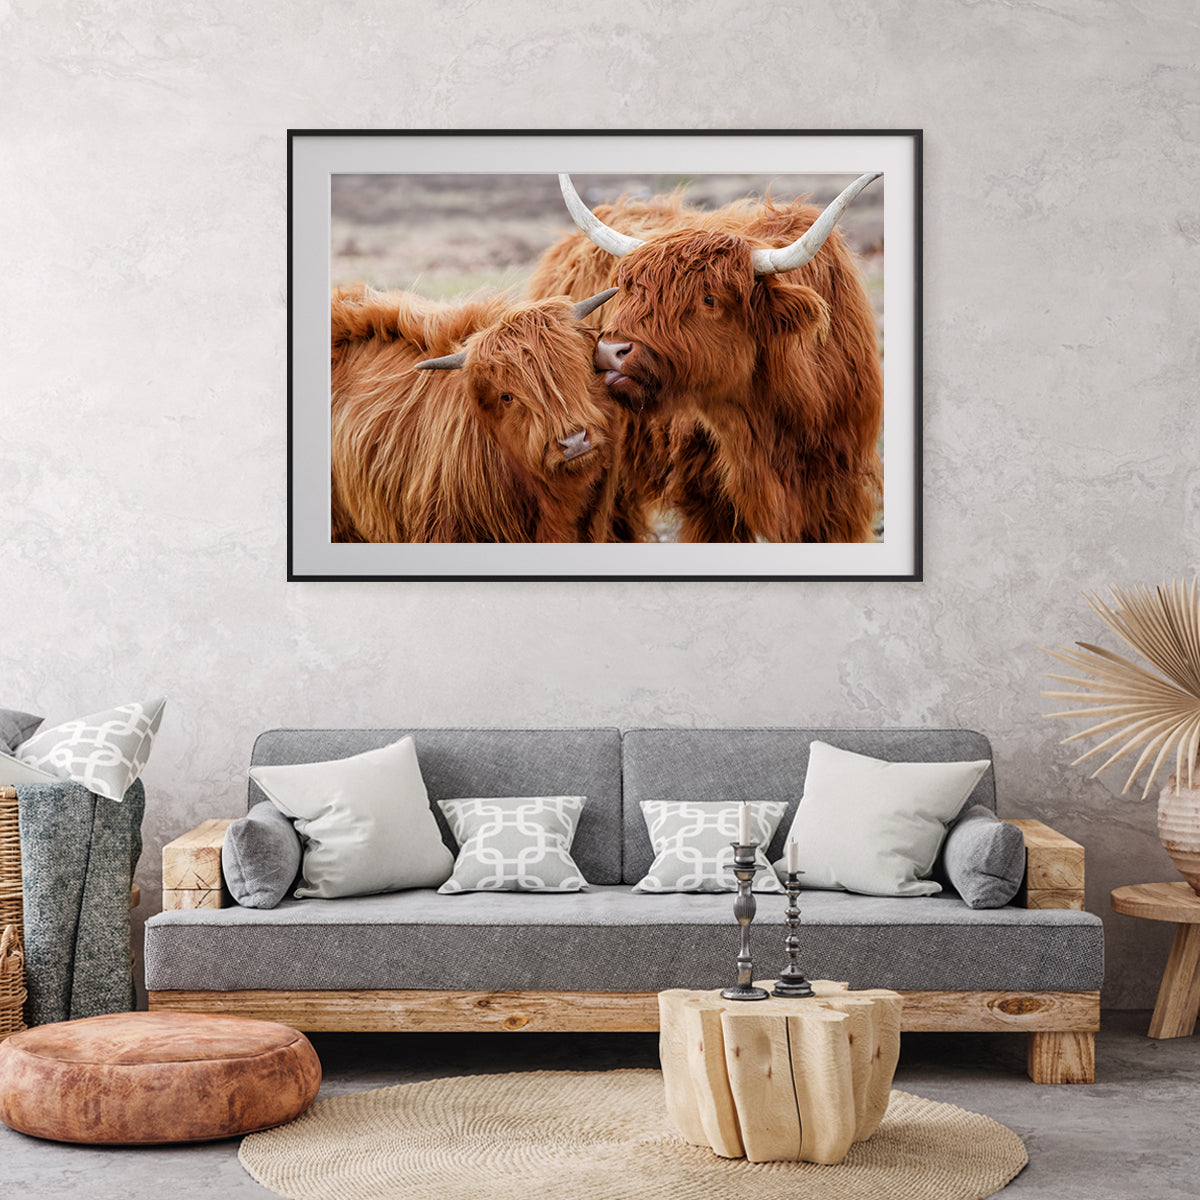 Highland Cow Couple Posters Prints Wall Decor-Horizontal Posters NOT FRAMED-CetArt-10″x8″ inches-CetArt